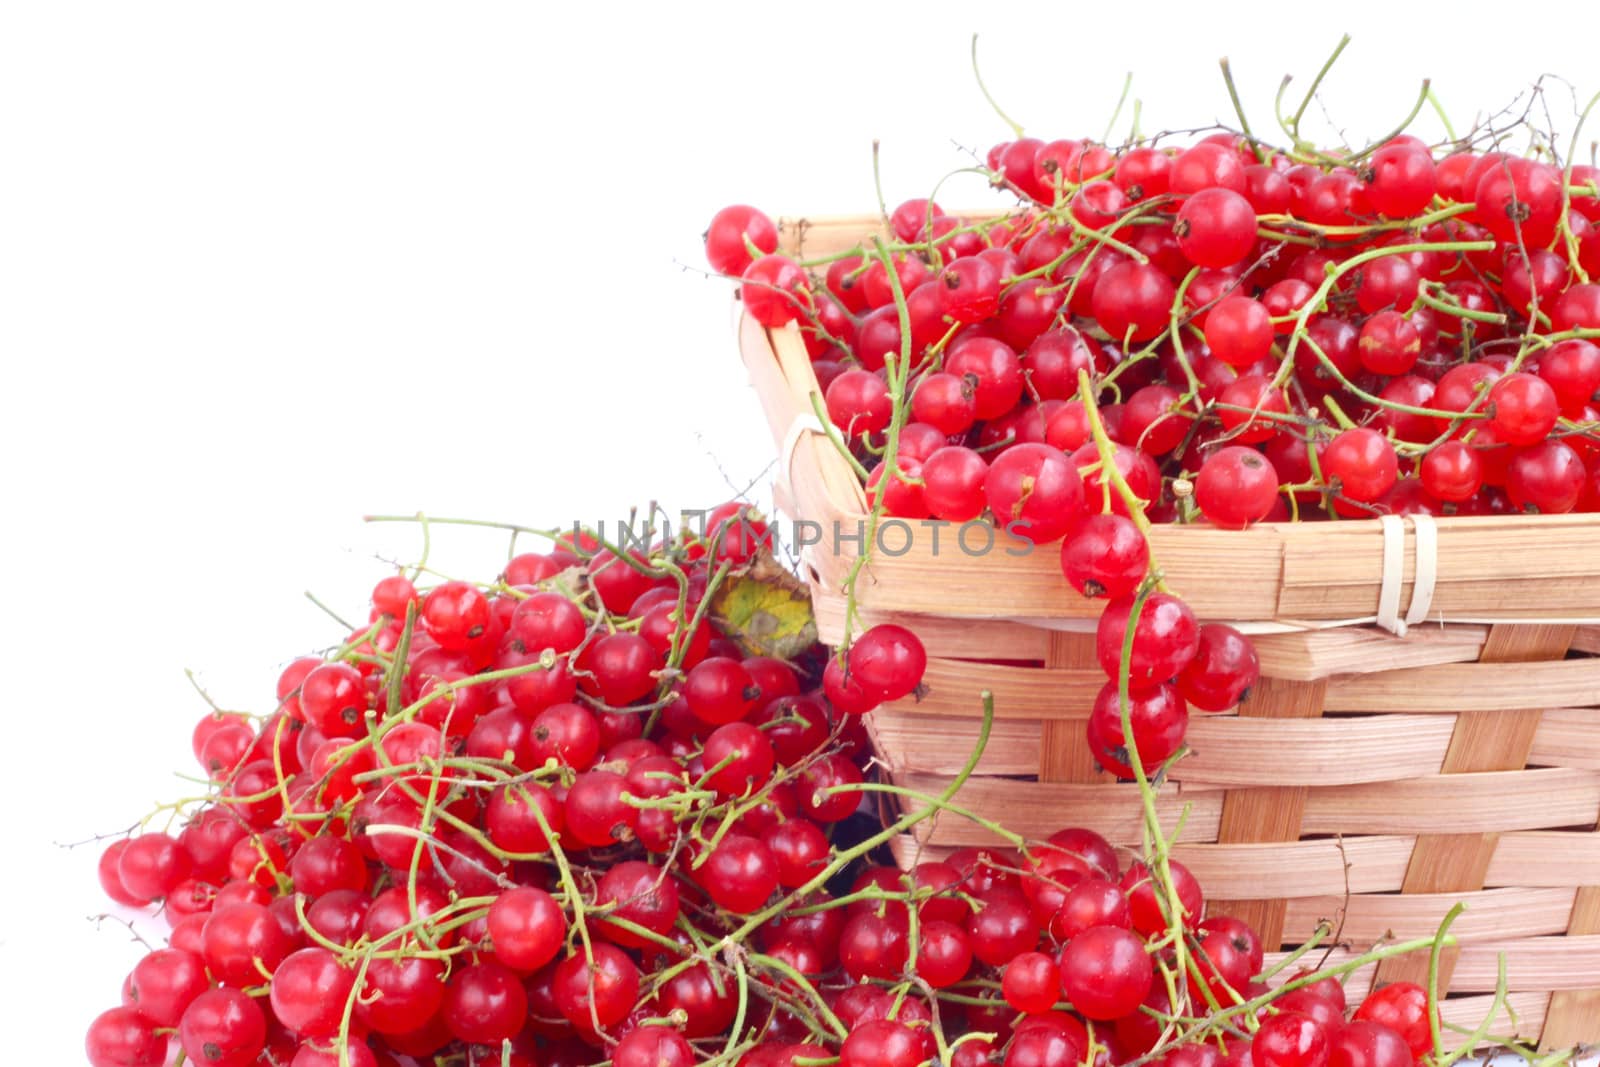 Harvested red currant berries in a small basket isolated on white background